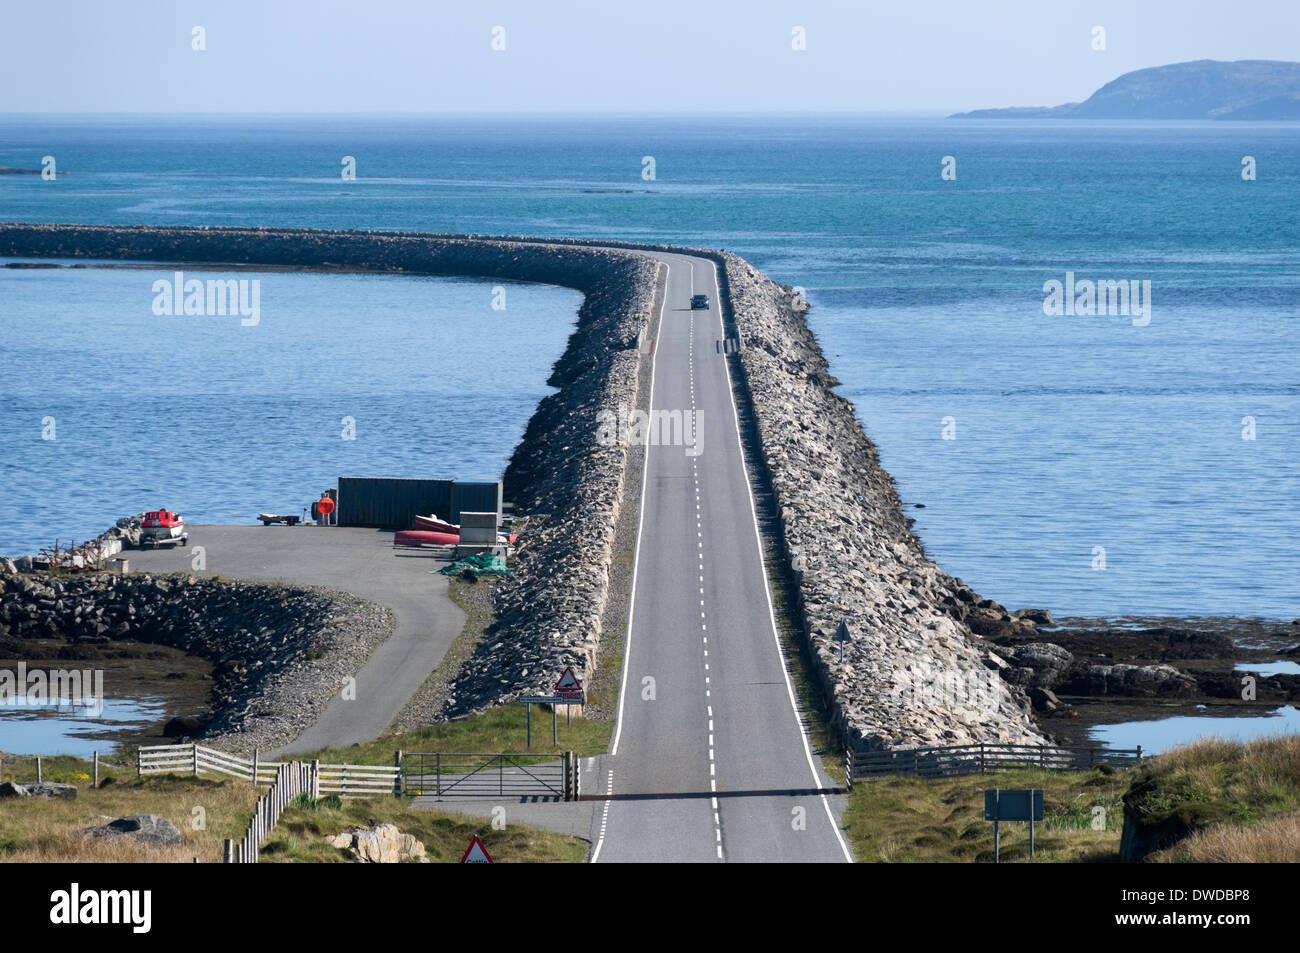 The Eriskay Causeway, linking the Islands of Eriskay and South Uist, Western Isles, Scotland, UK.  Seen from the Sth. Uist side. Stock Photo